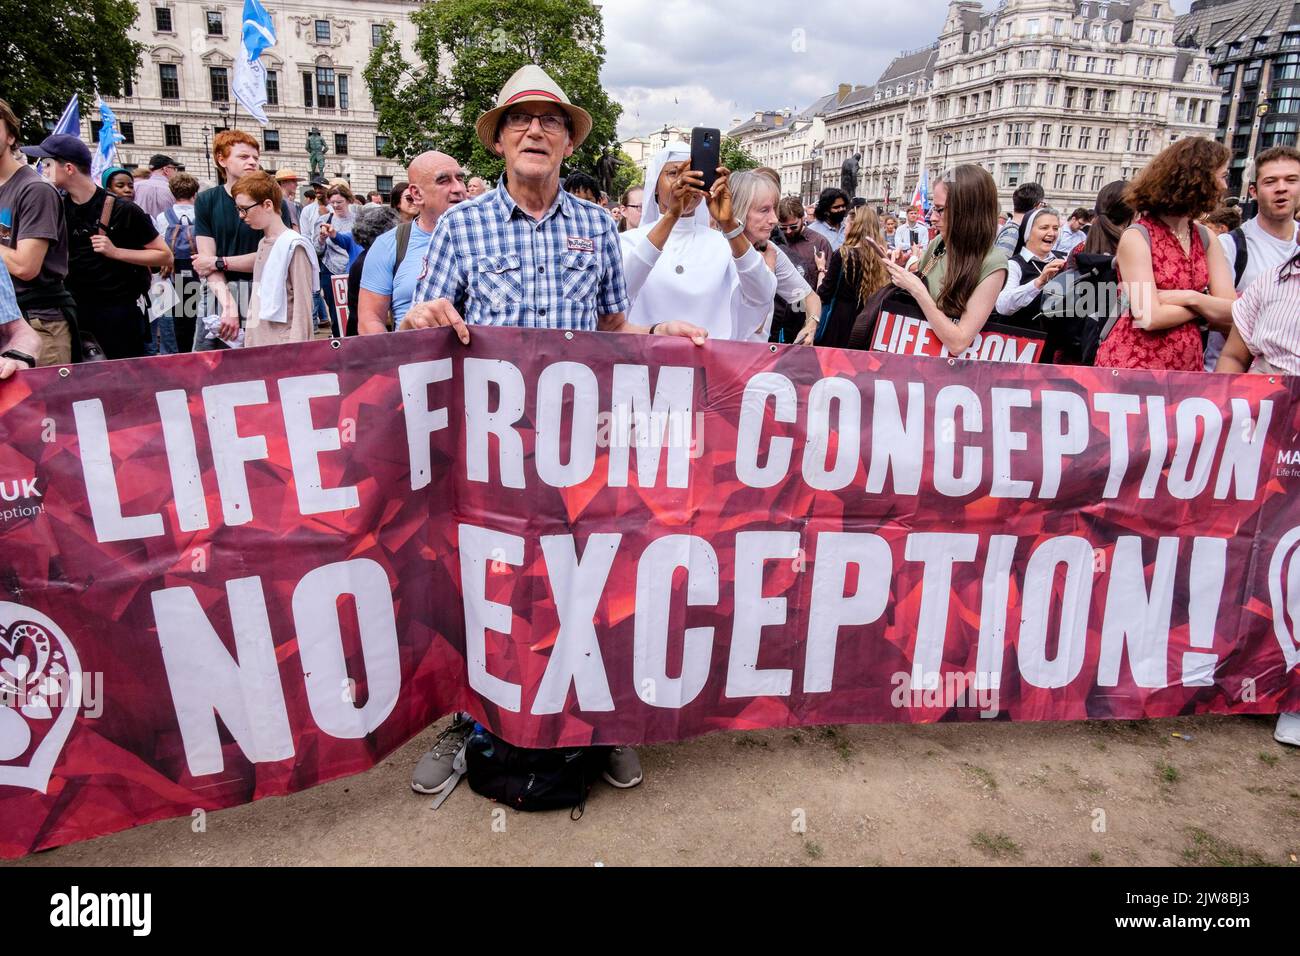 London, UK. 3 September 2022. Members of anti-abortion groups rally in Parliament Square, Westminster following an annual 'March For Life' in central London. Pro-choice abortion campaigners also gather to voice their opposition to the anti-abortion movement. Pictured: The central message of the anti-abortion campaigners of Life from Conception, No Exception on display at the rally. Stock Photo